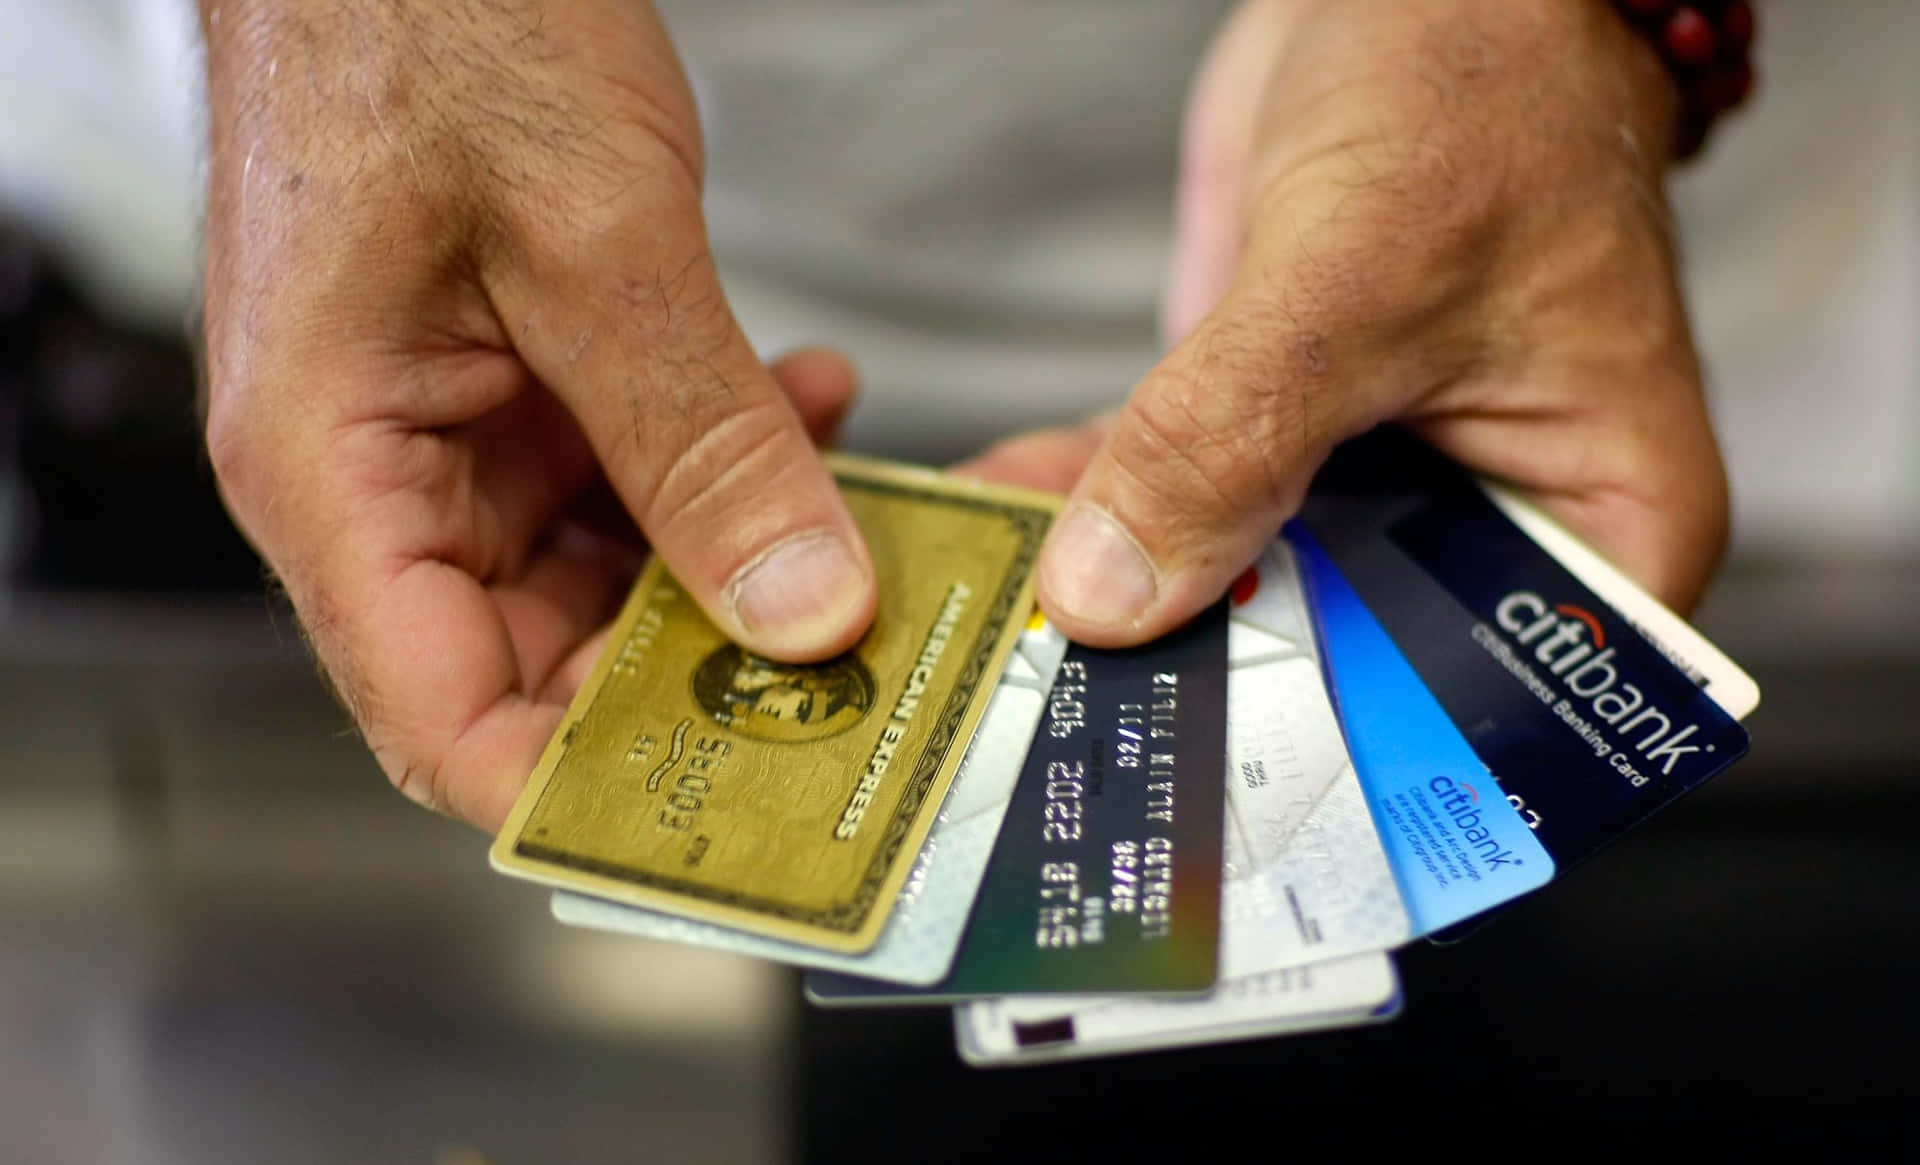 Simplify your finances with a credit card